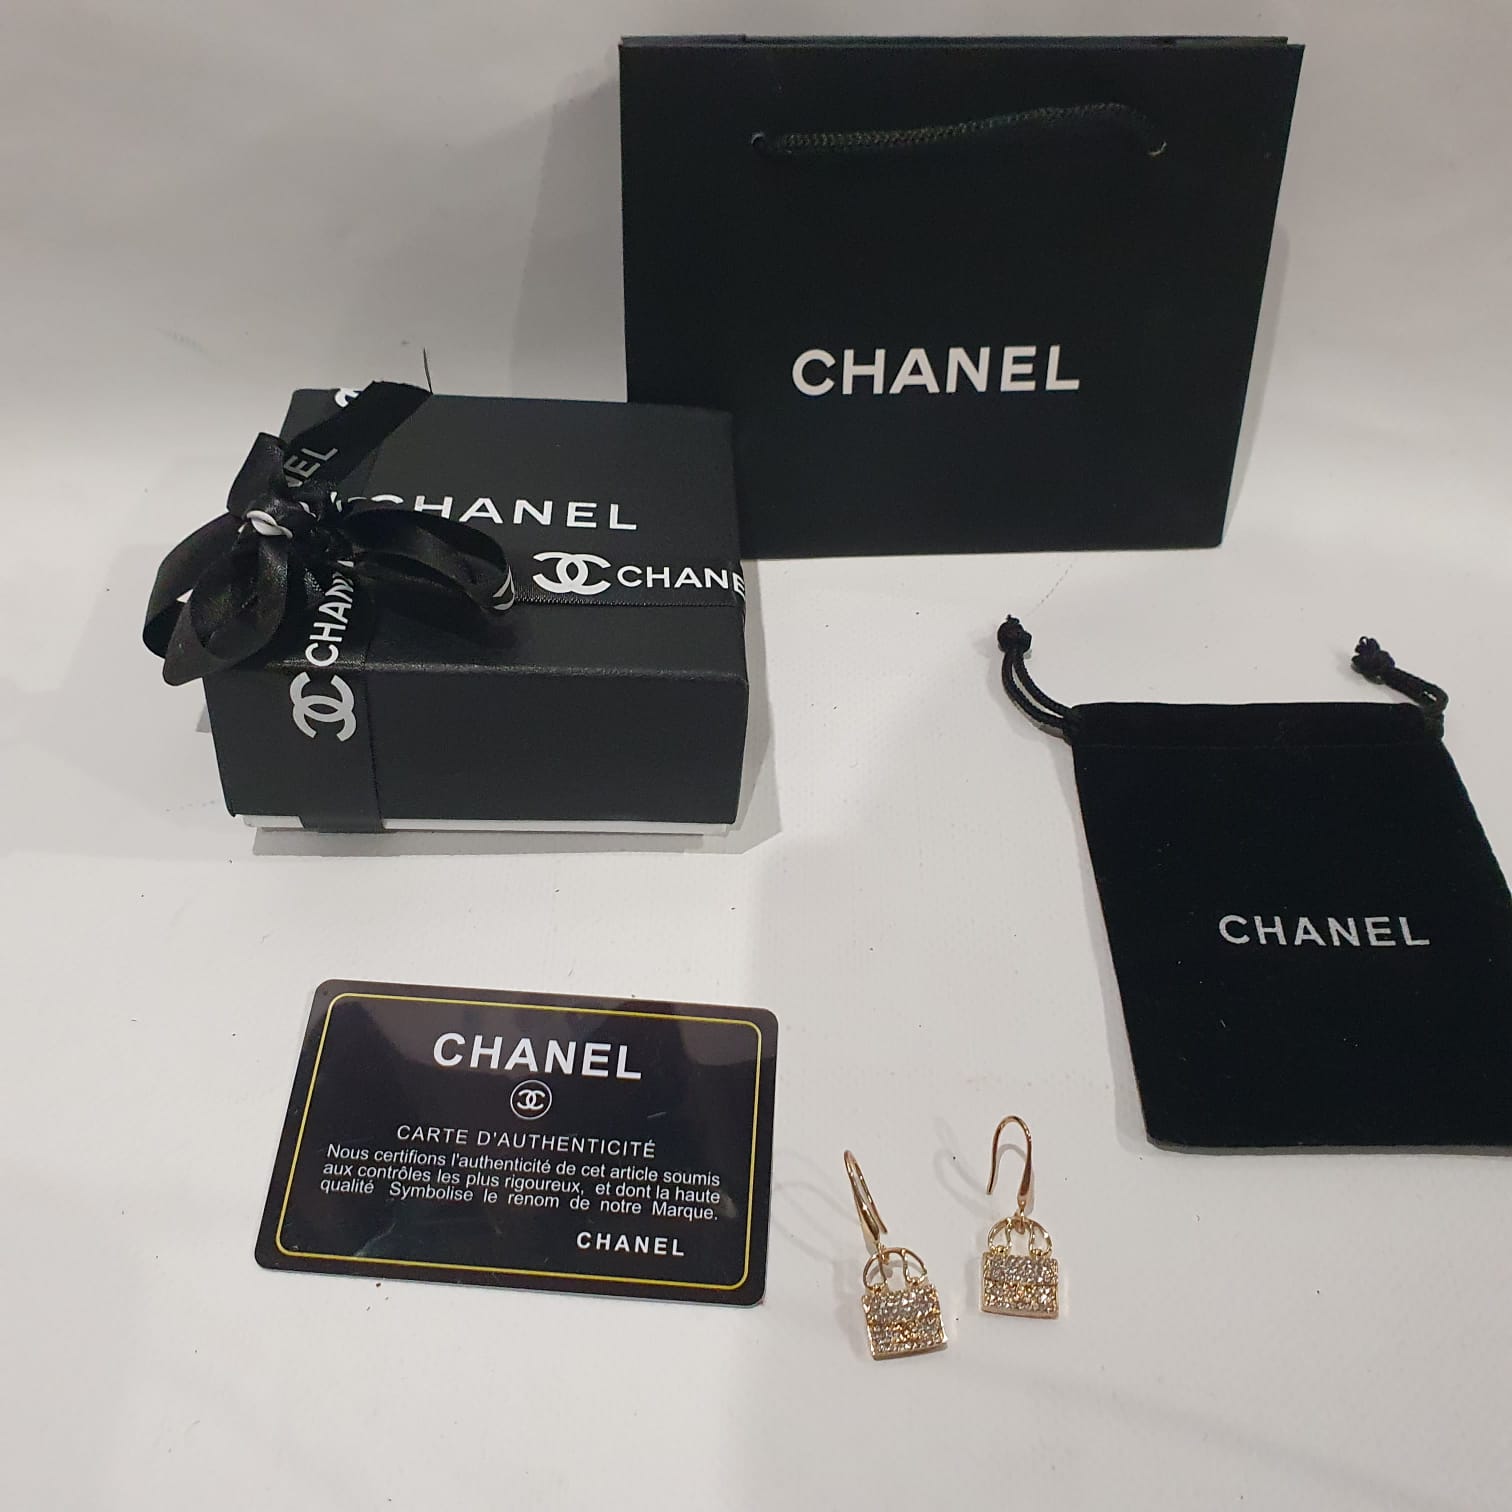 Chanel Necklace and Earrings